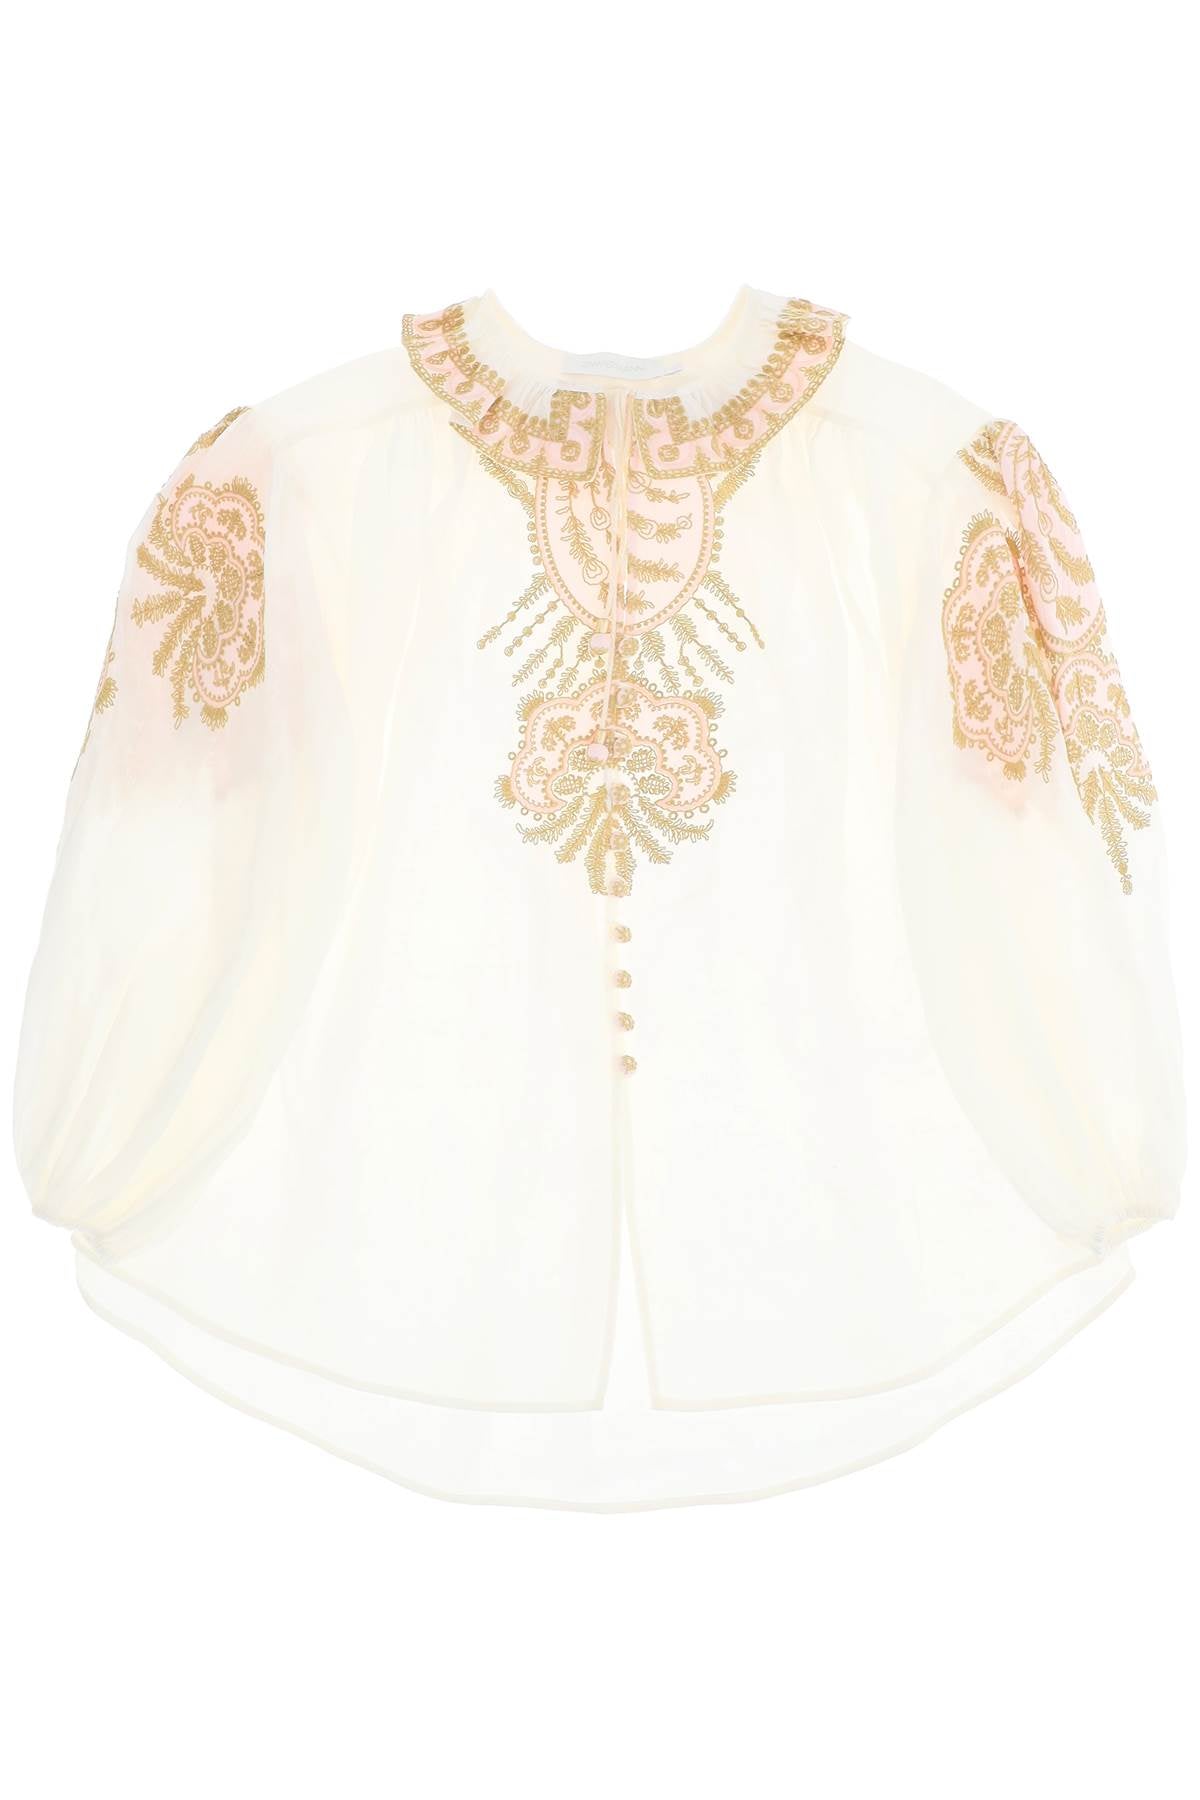 ZIMMERMANN Embroidered Ramie Blouse for Women